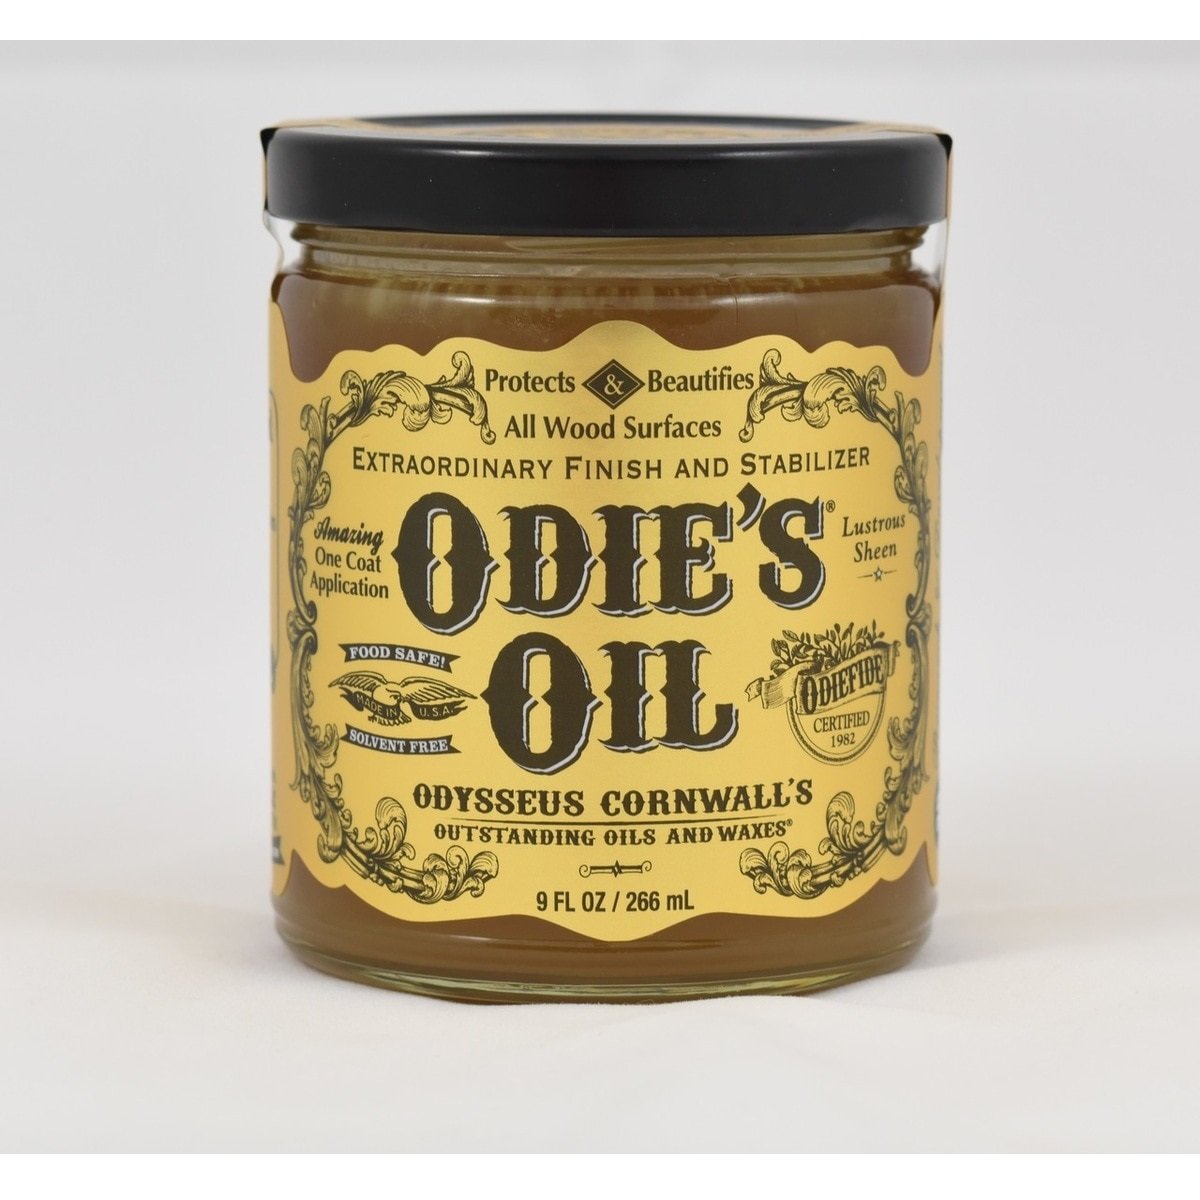 Odies Oil Original Finish and Stabilizer for Wood Surfaces OOUNI9OZ